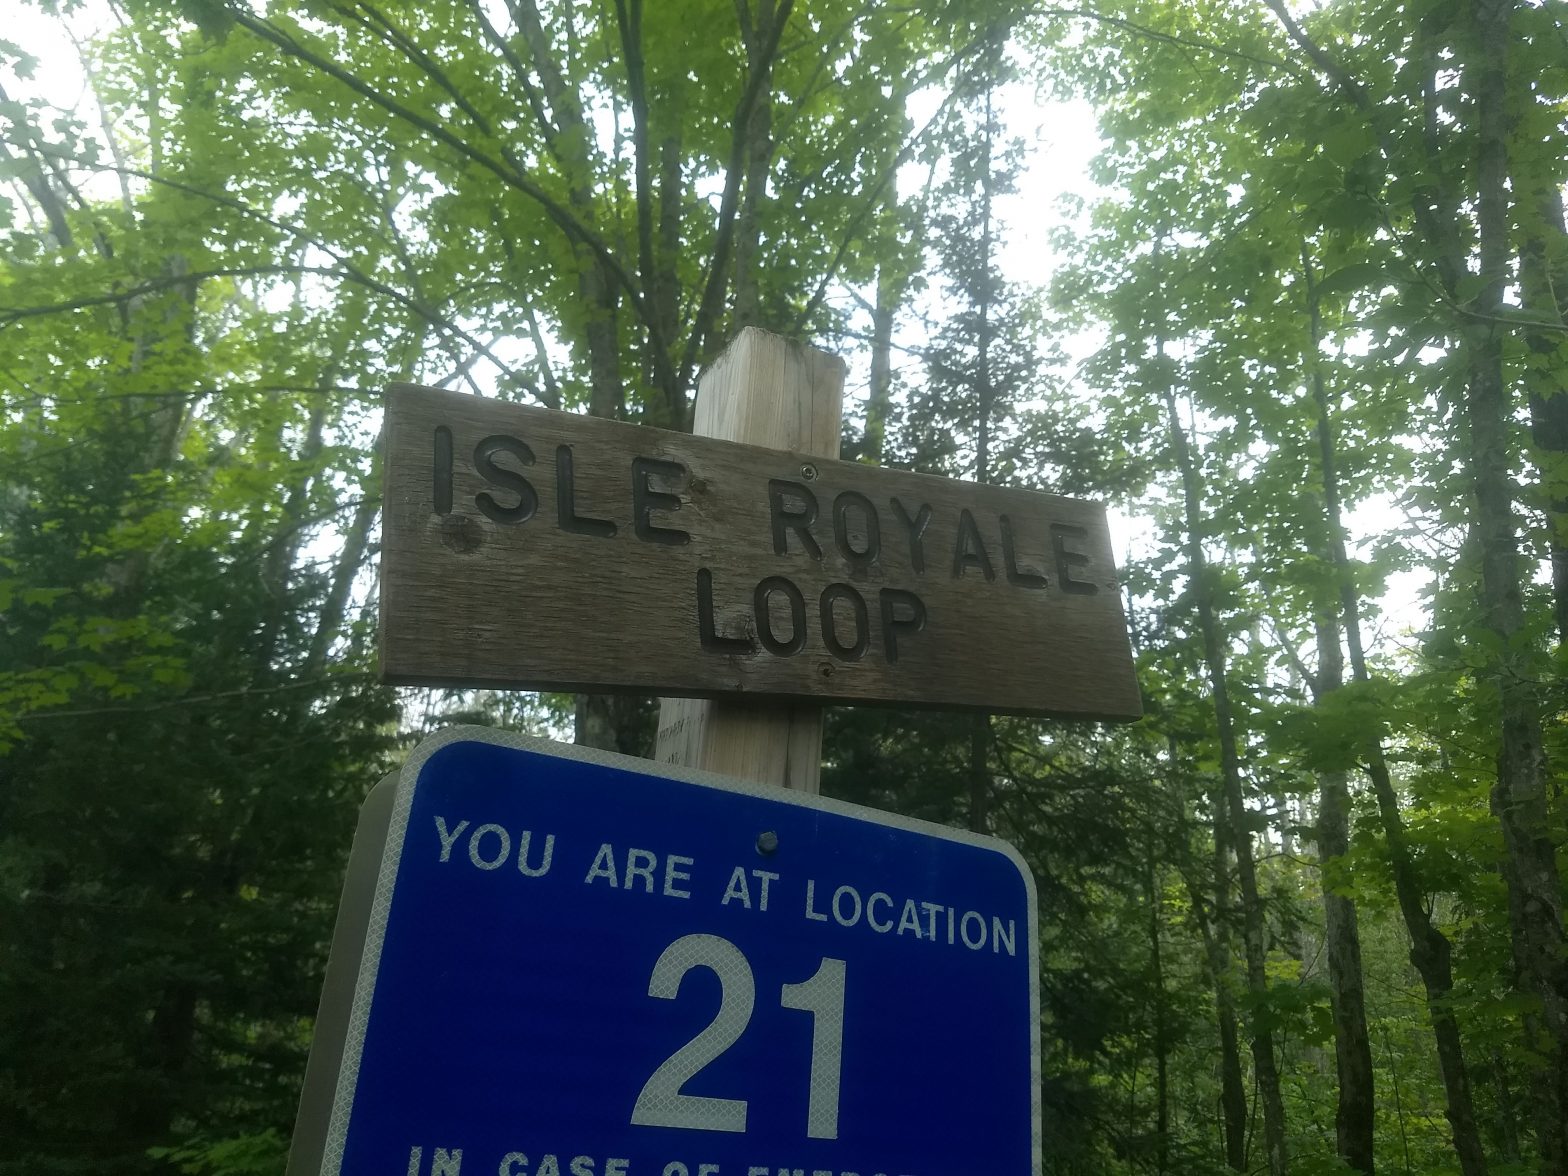 an image of the Isle Royale Loop Trail